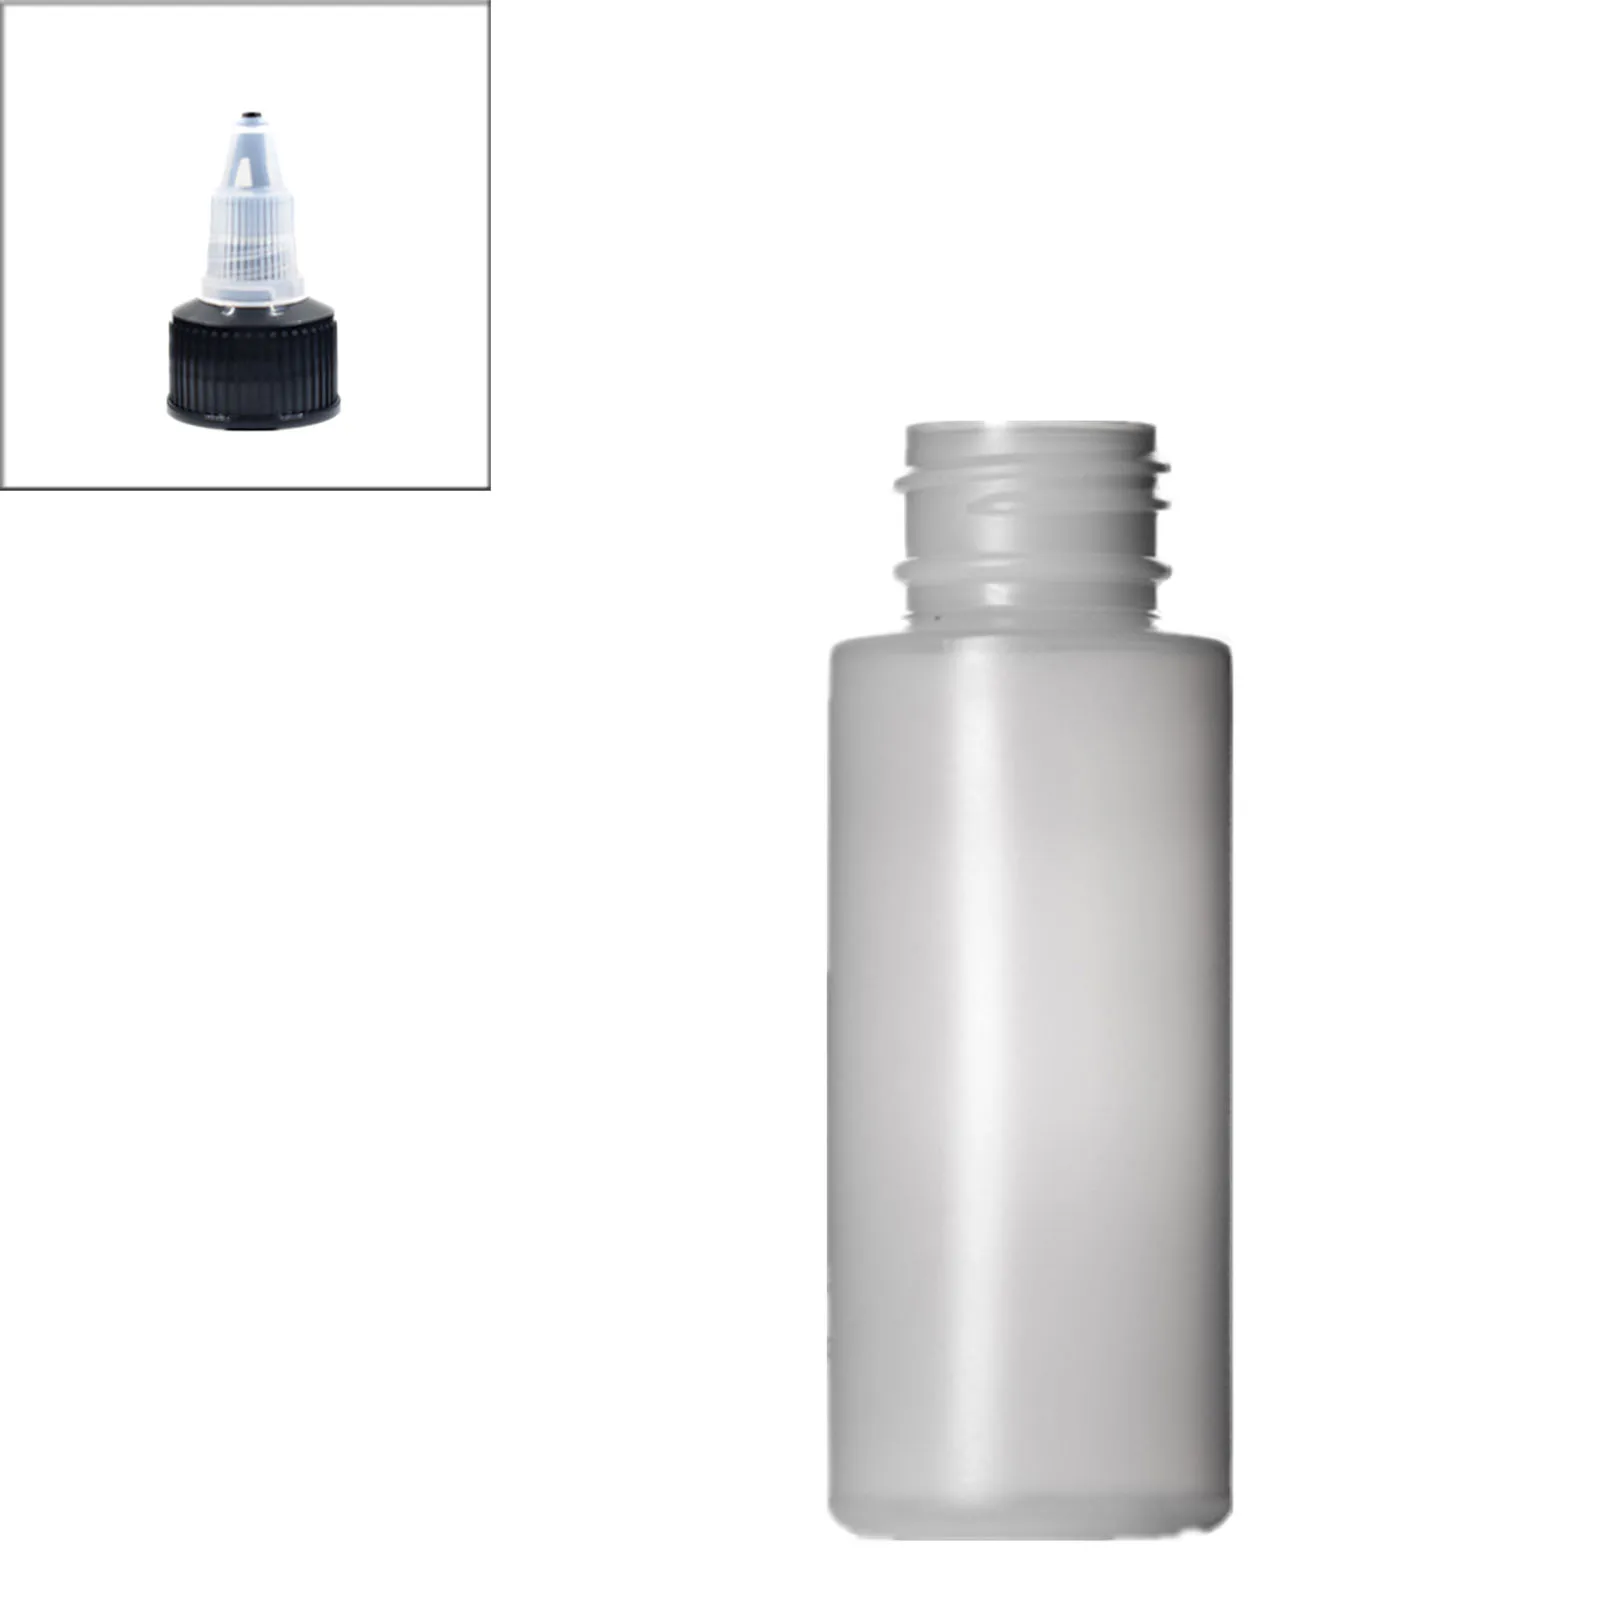 

5pcs 2oz/60ml natural-colored HDPE cylinder round soft Squeeze bottle with Twist Top Caps, pointed mouth top cap for oil ink